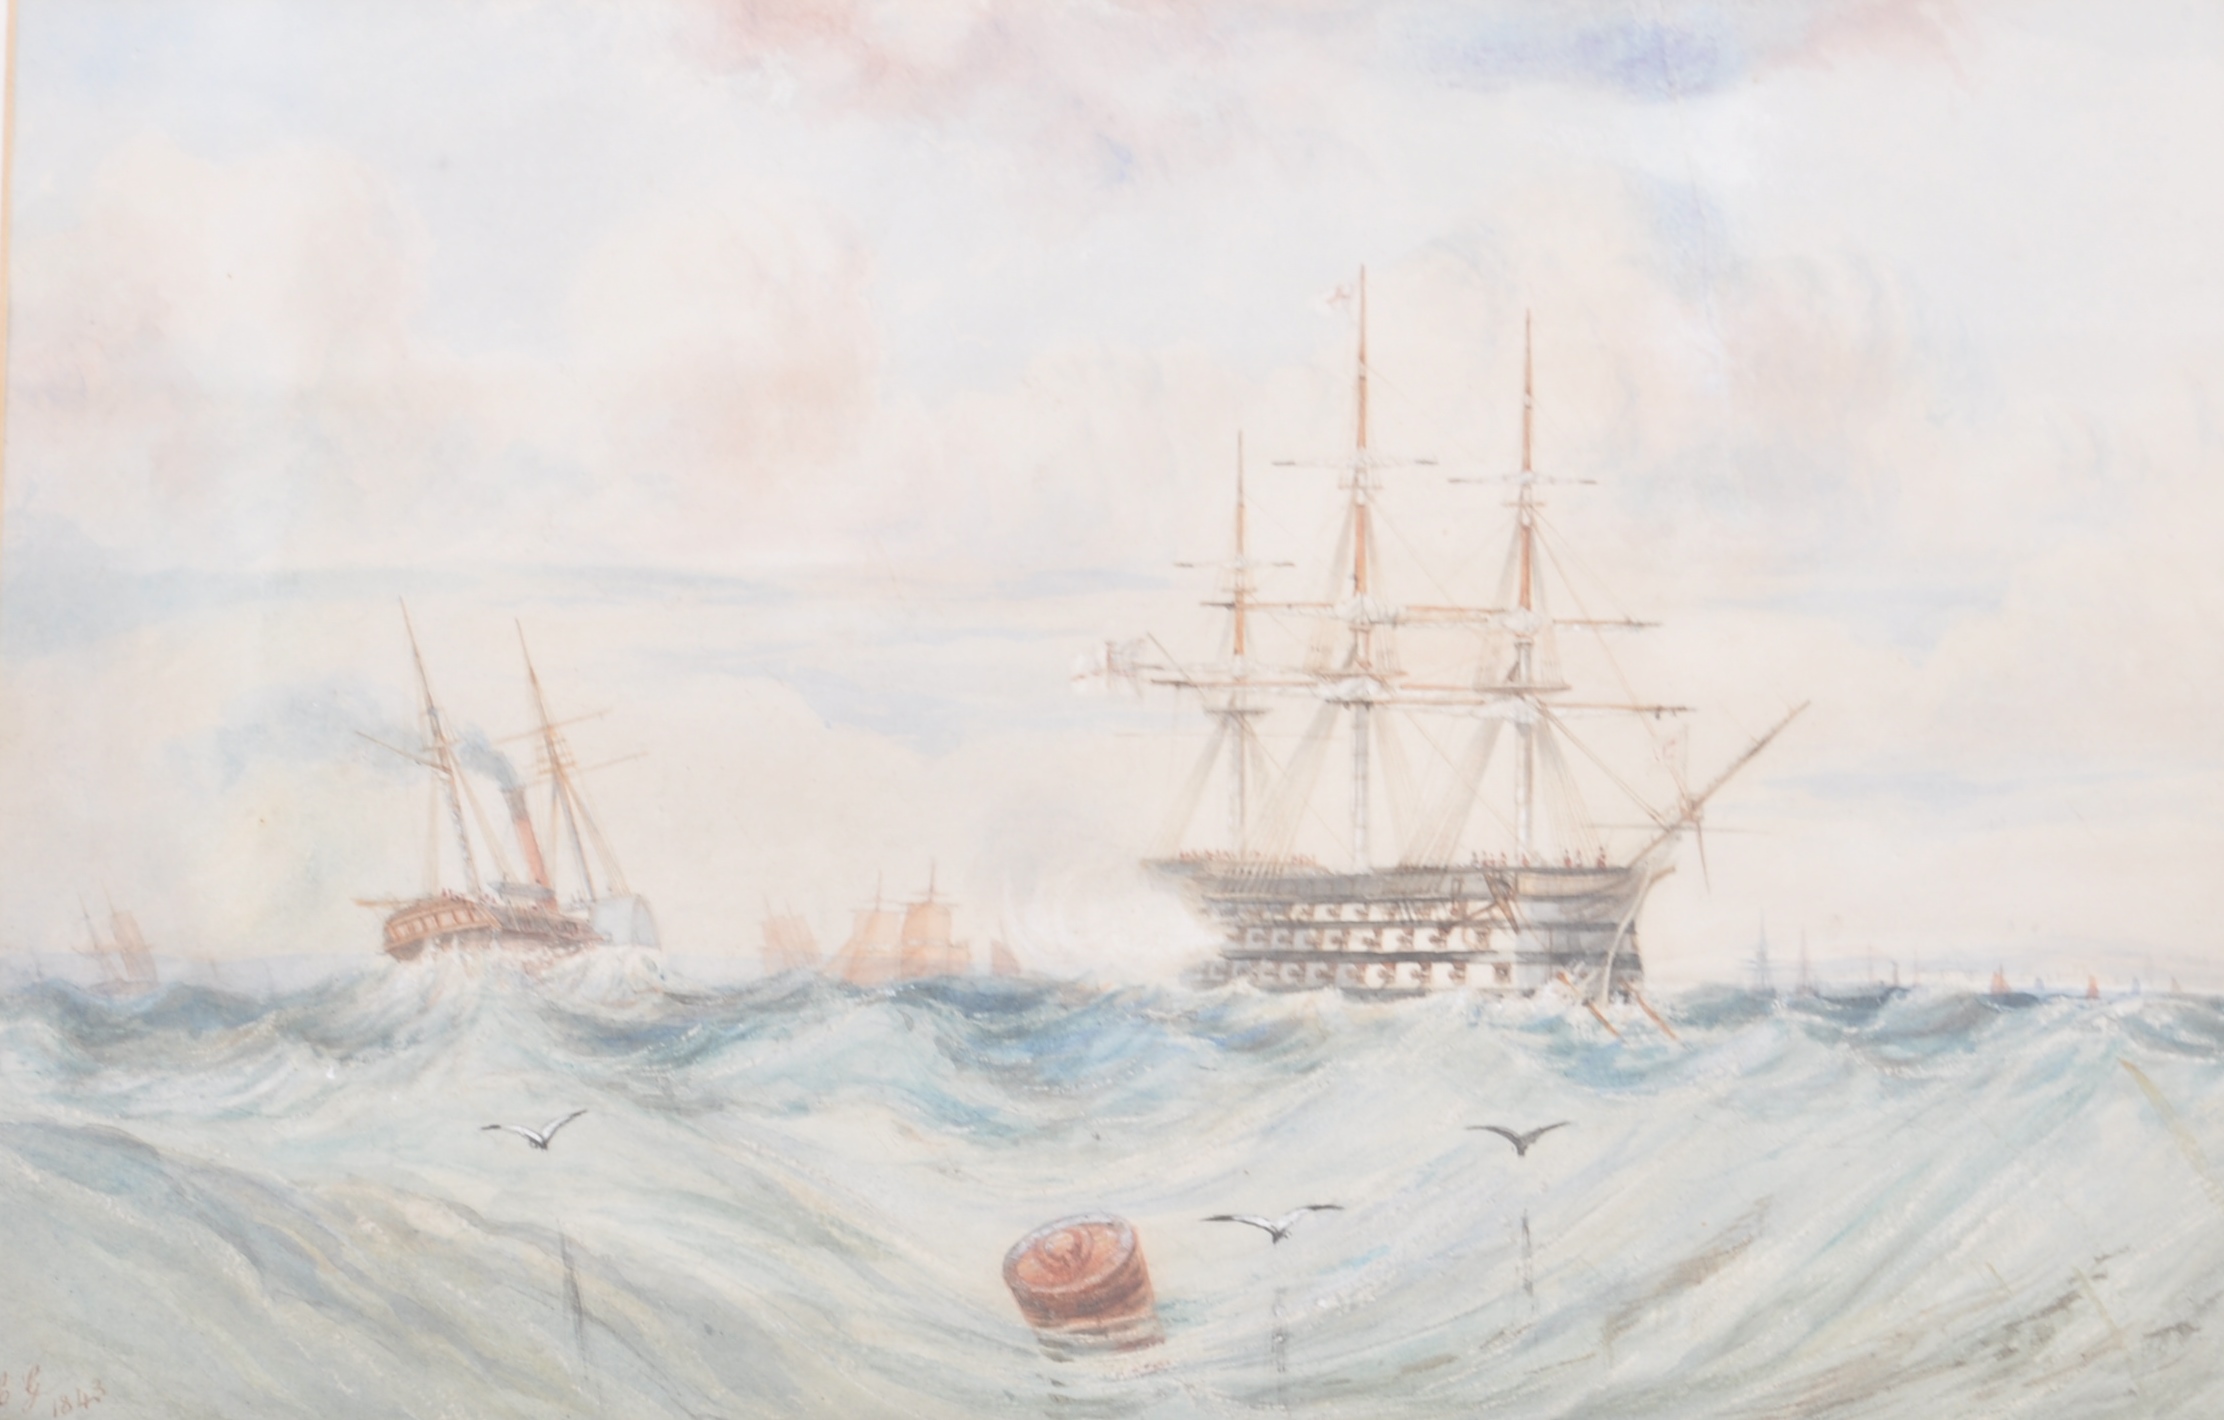 MID 19TH CENTURY VICTORIAN MARITIME WATERCOLOUR PAINTING